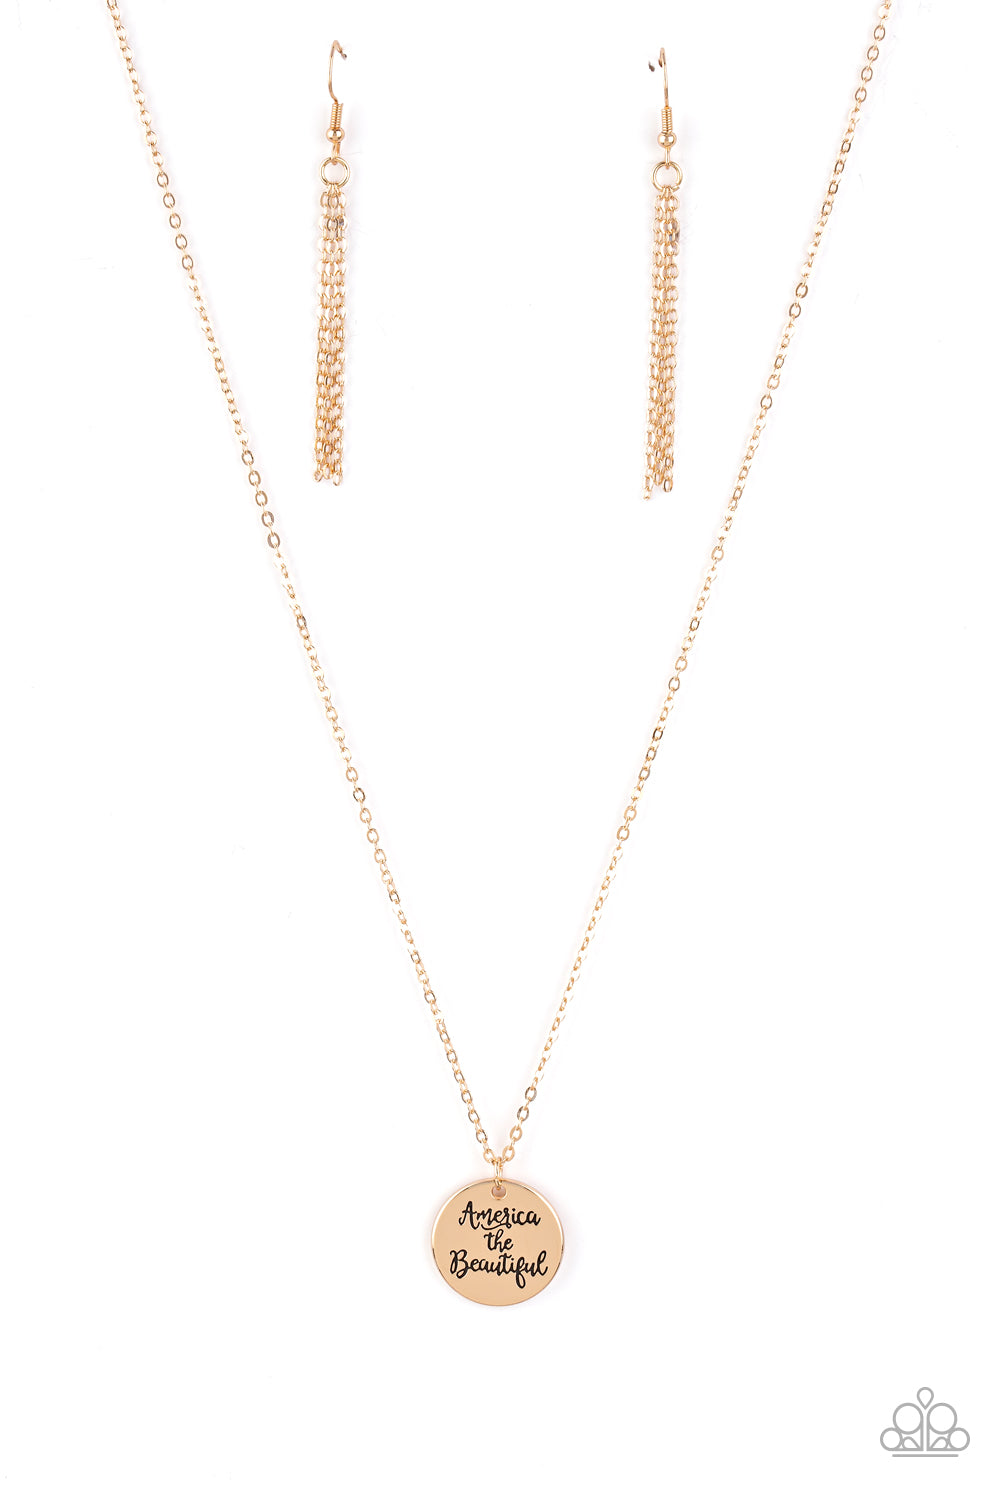 five-dollar-jewelry-america-the-beautiful-gold-necklace-paparazzi-accessories